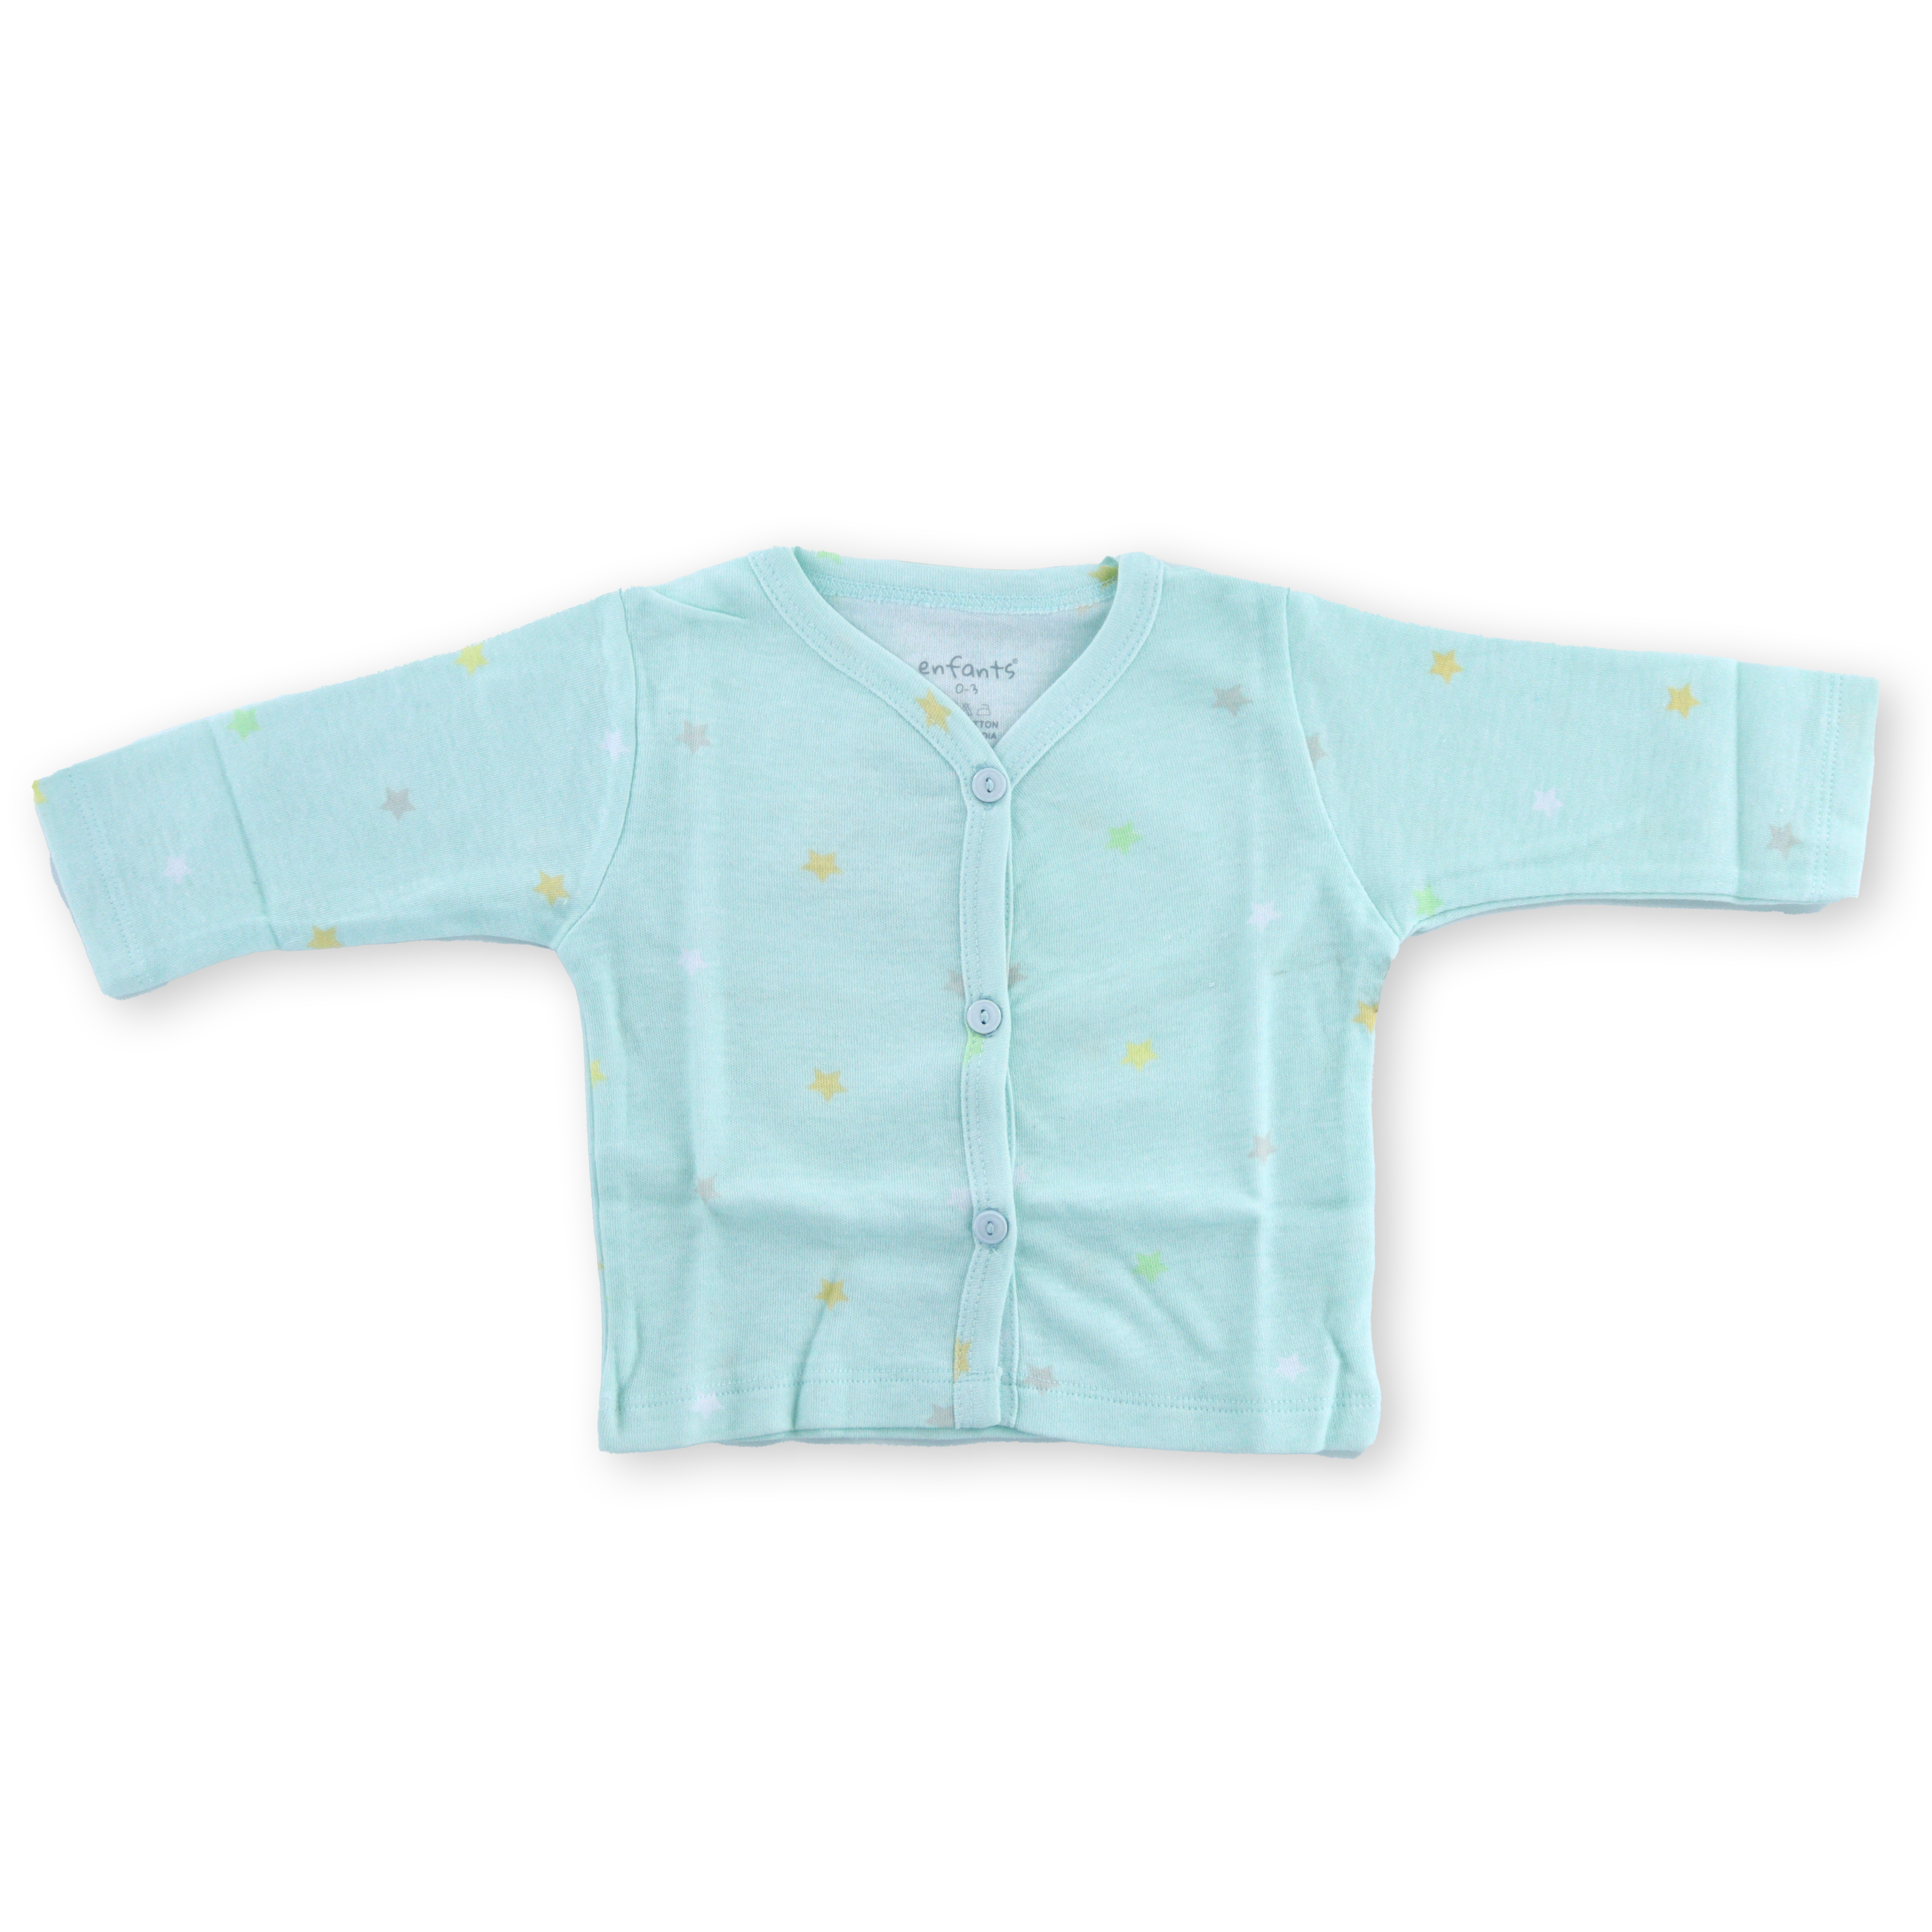 Infants Baby boys clothing sets | Cotton T-shirt with pant| Everyday wear soft cotton